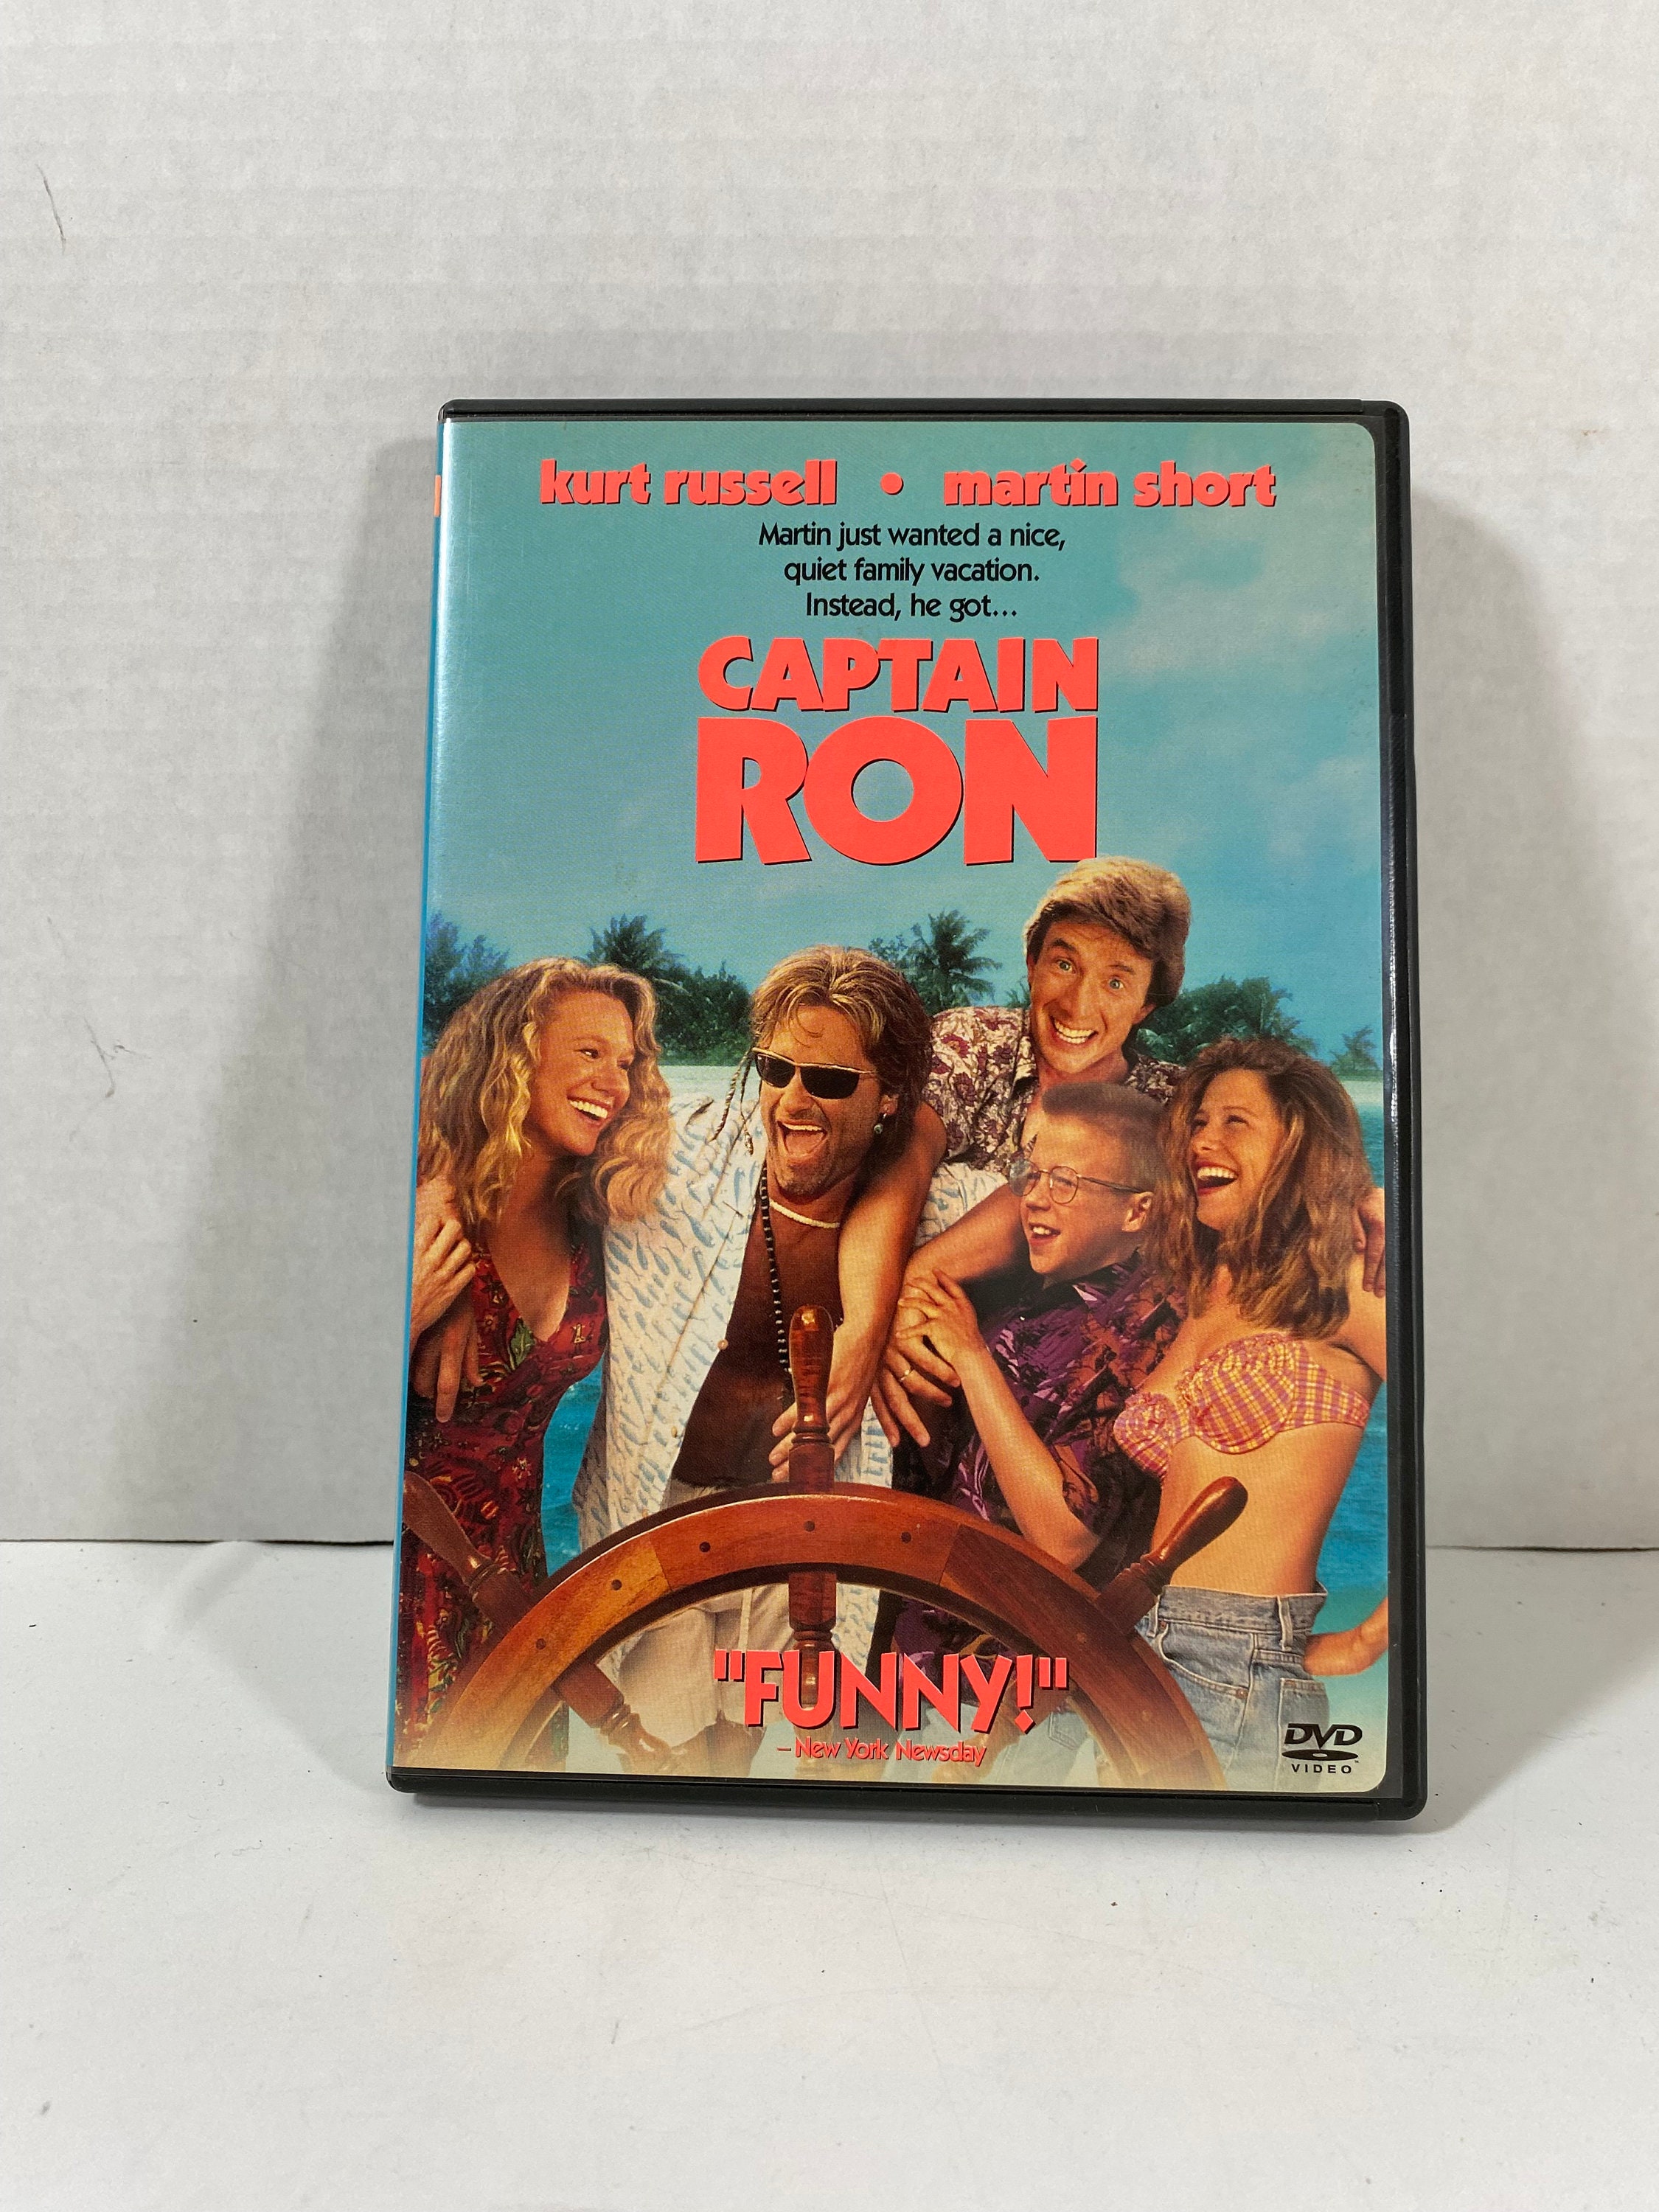 Vintage 2002 Captain Ron DVD Starring: Kurt Russell, Martin Short & Mary  Kay Place Collectable Comedy Gift Idea - Etsy